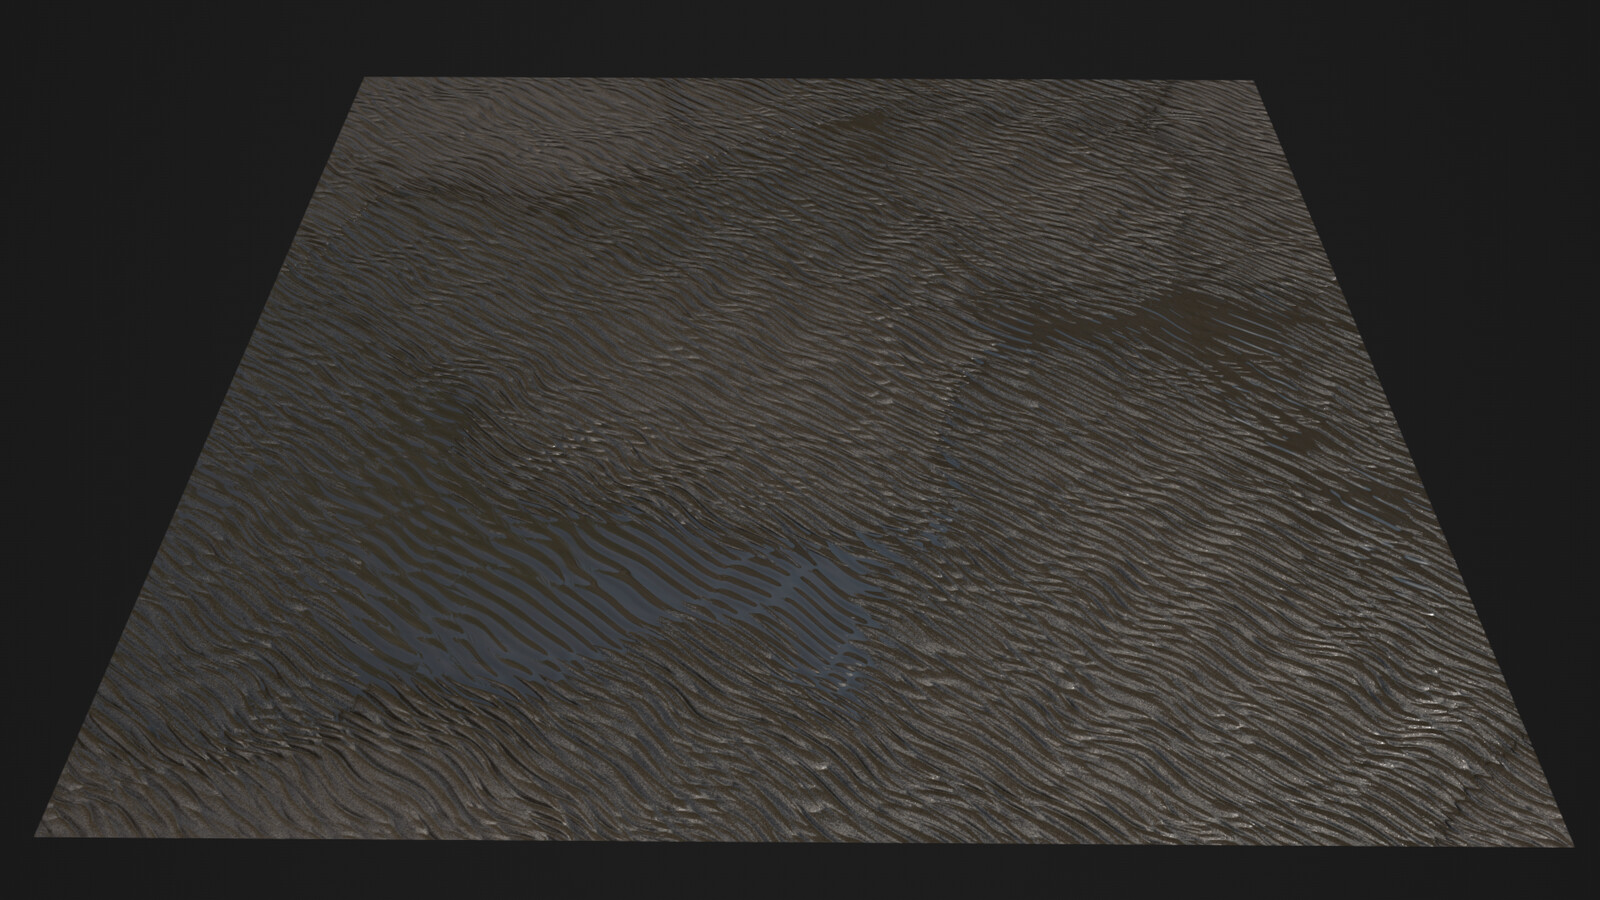 A ground-plane render for a better look at the water interaction with the sand.